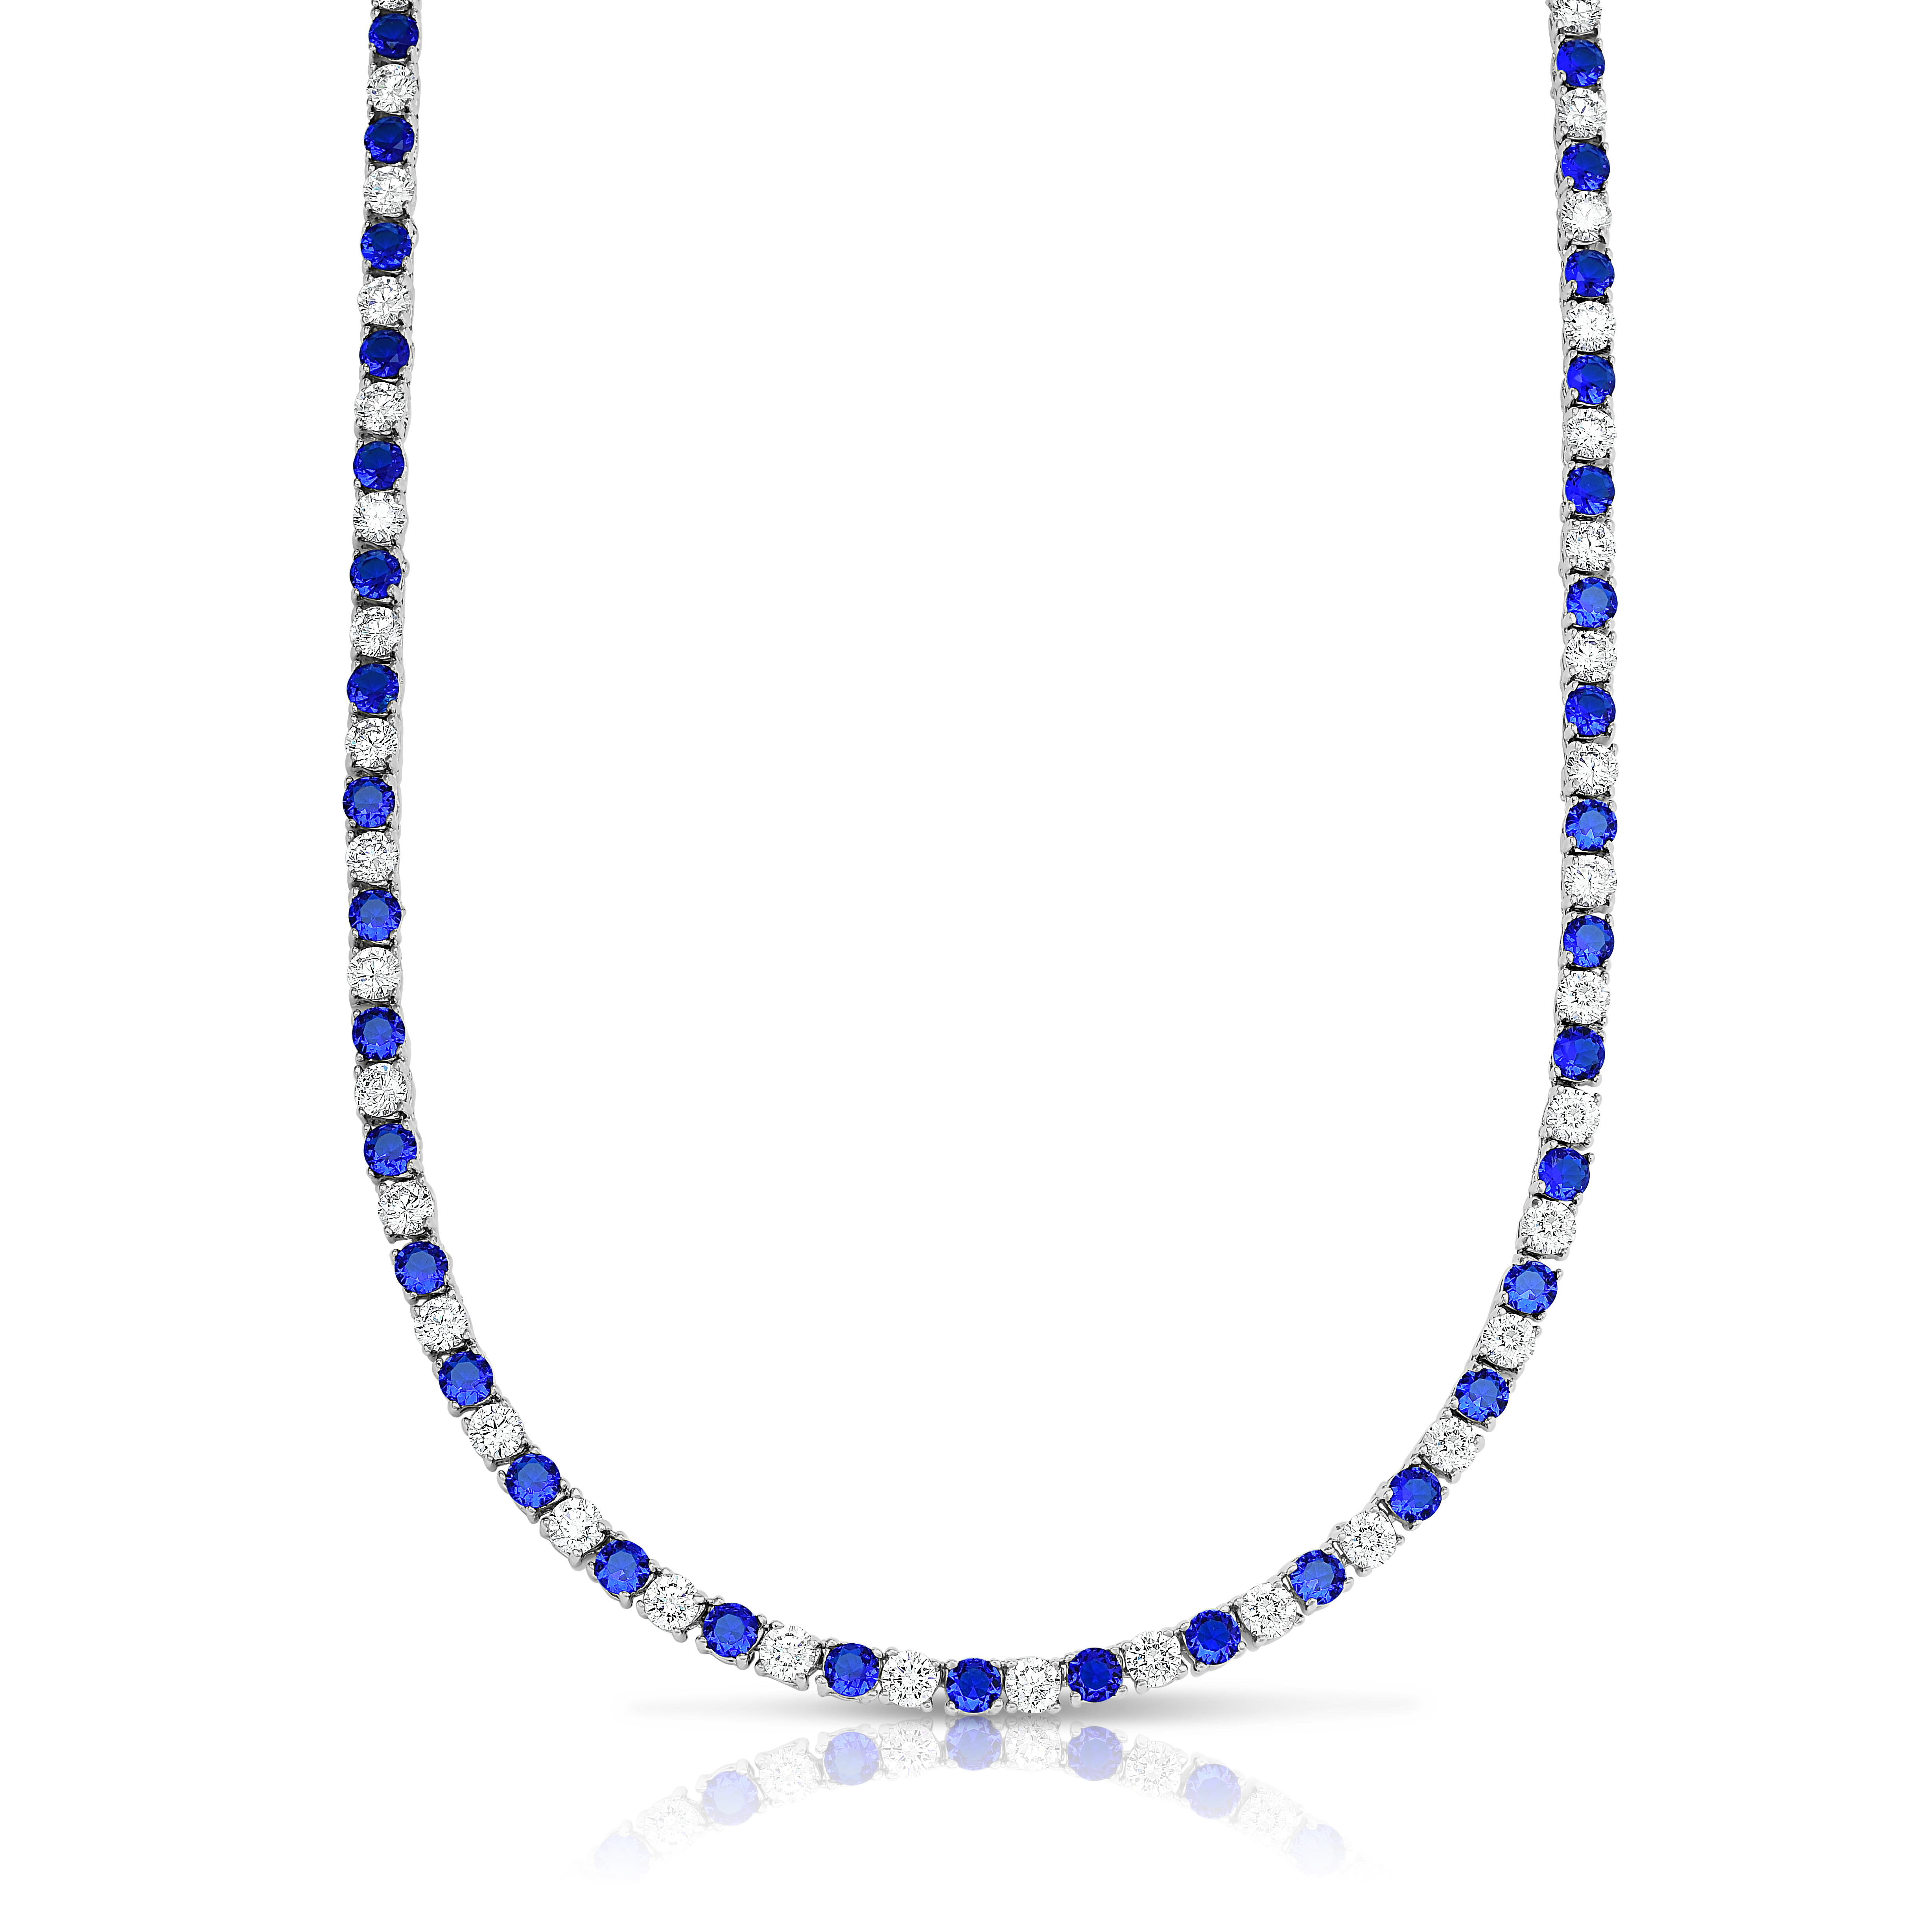 yeidid-international 22.00 CTTW Sapphire And White SImulated Diamond Tennis Necklace in 18K White Gold